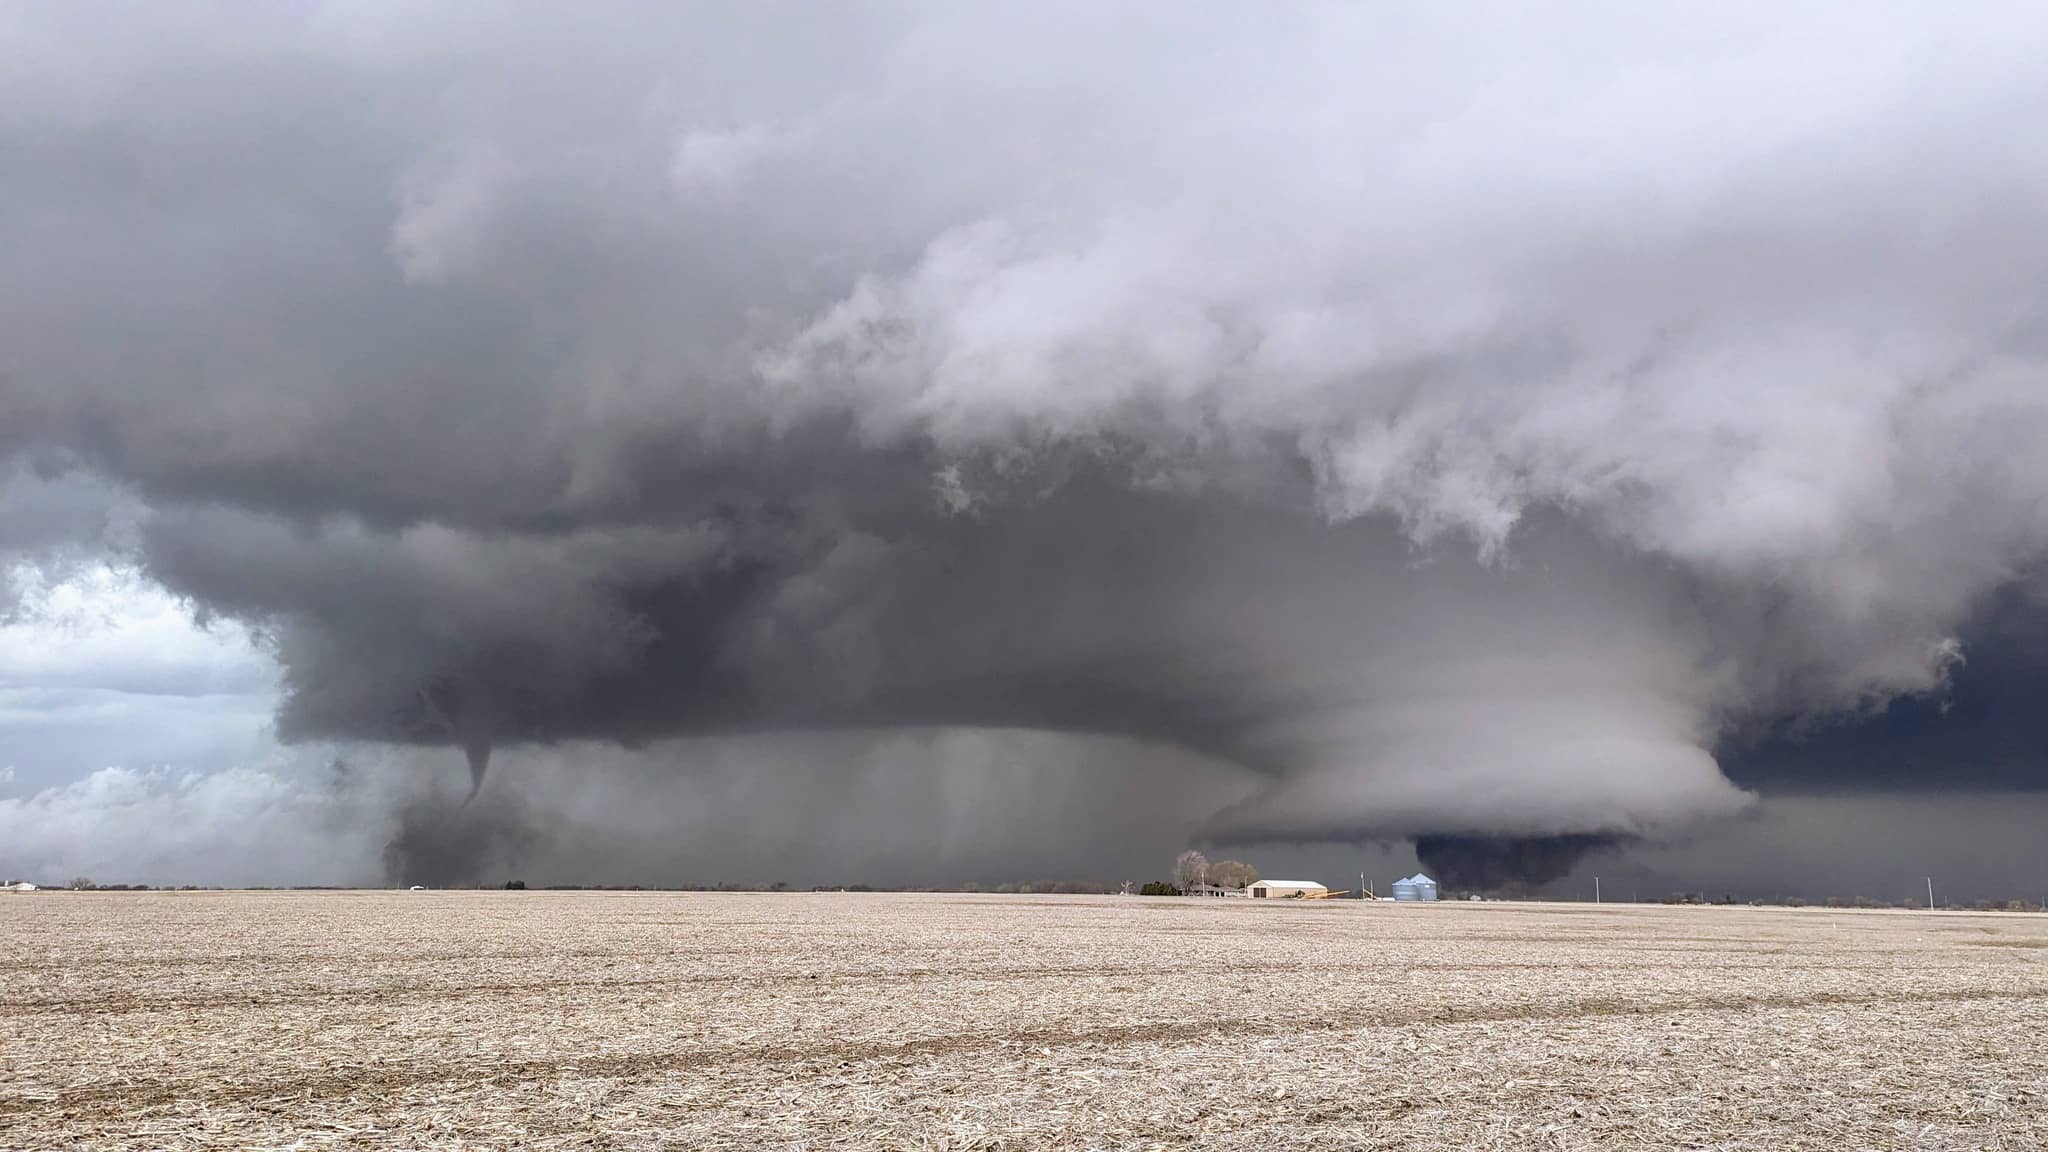 Tornado iowa damage significant eastern causes